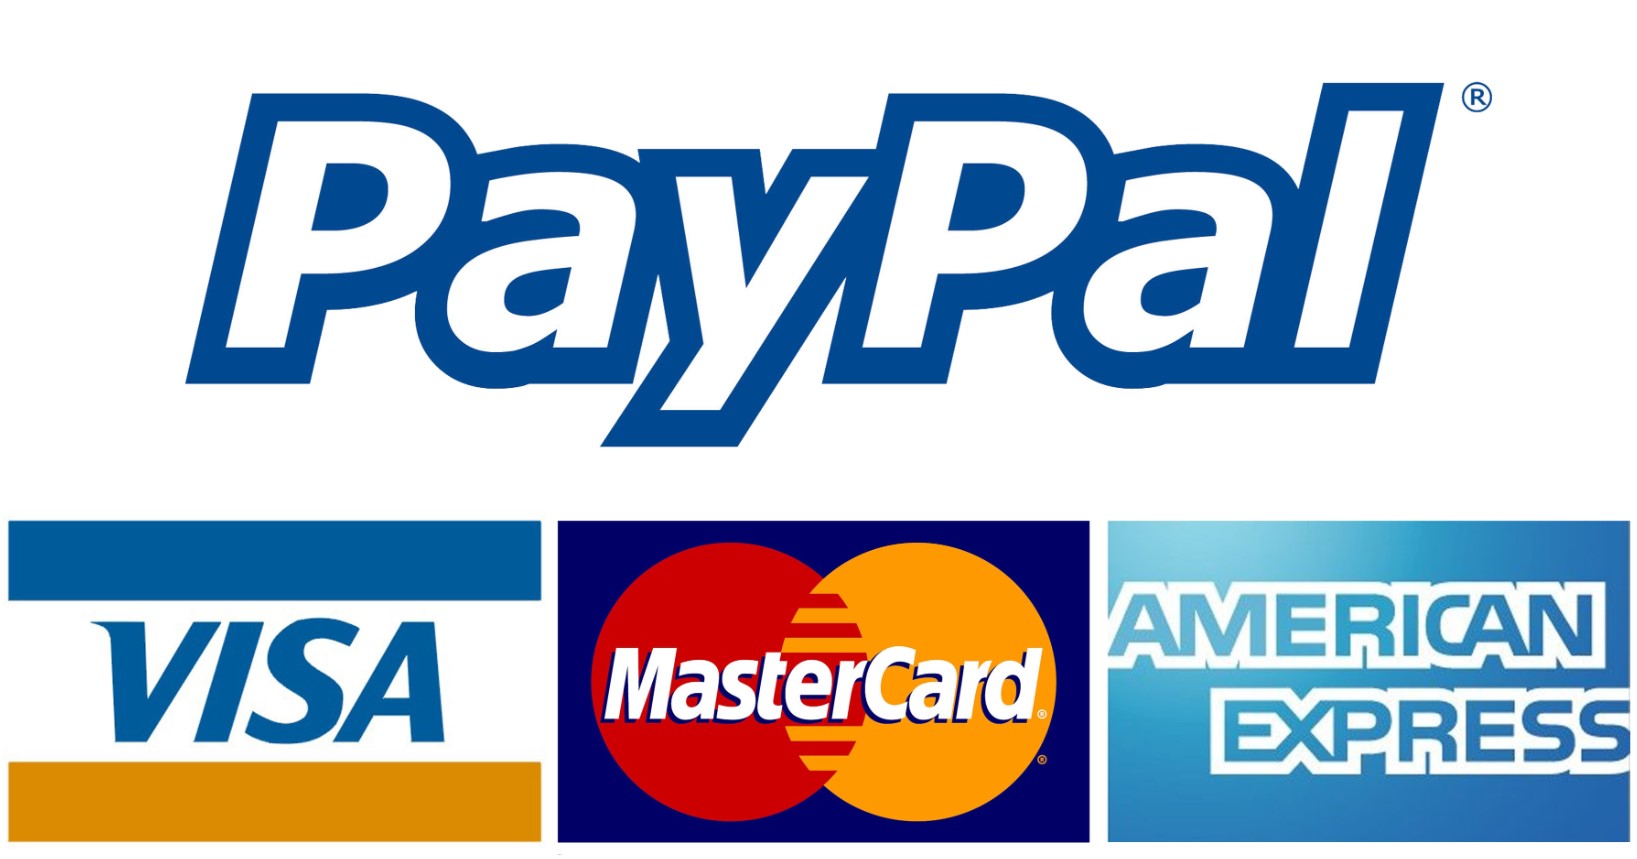 HOW TO SCAN THE QR CODE TO PAY BY PAYPAL-2